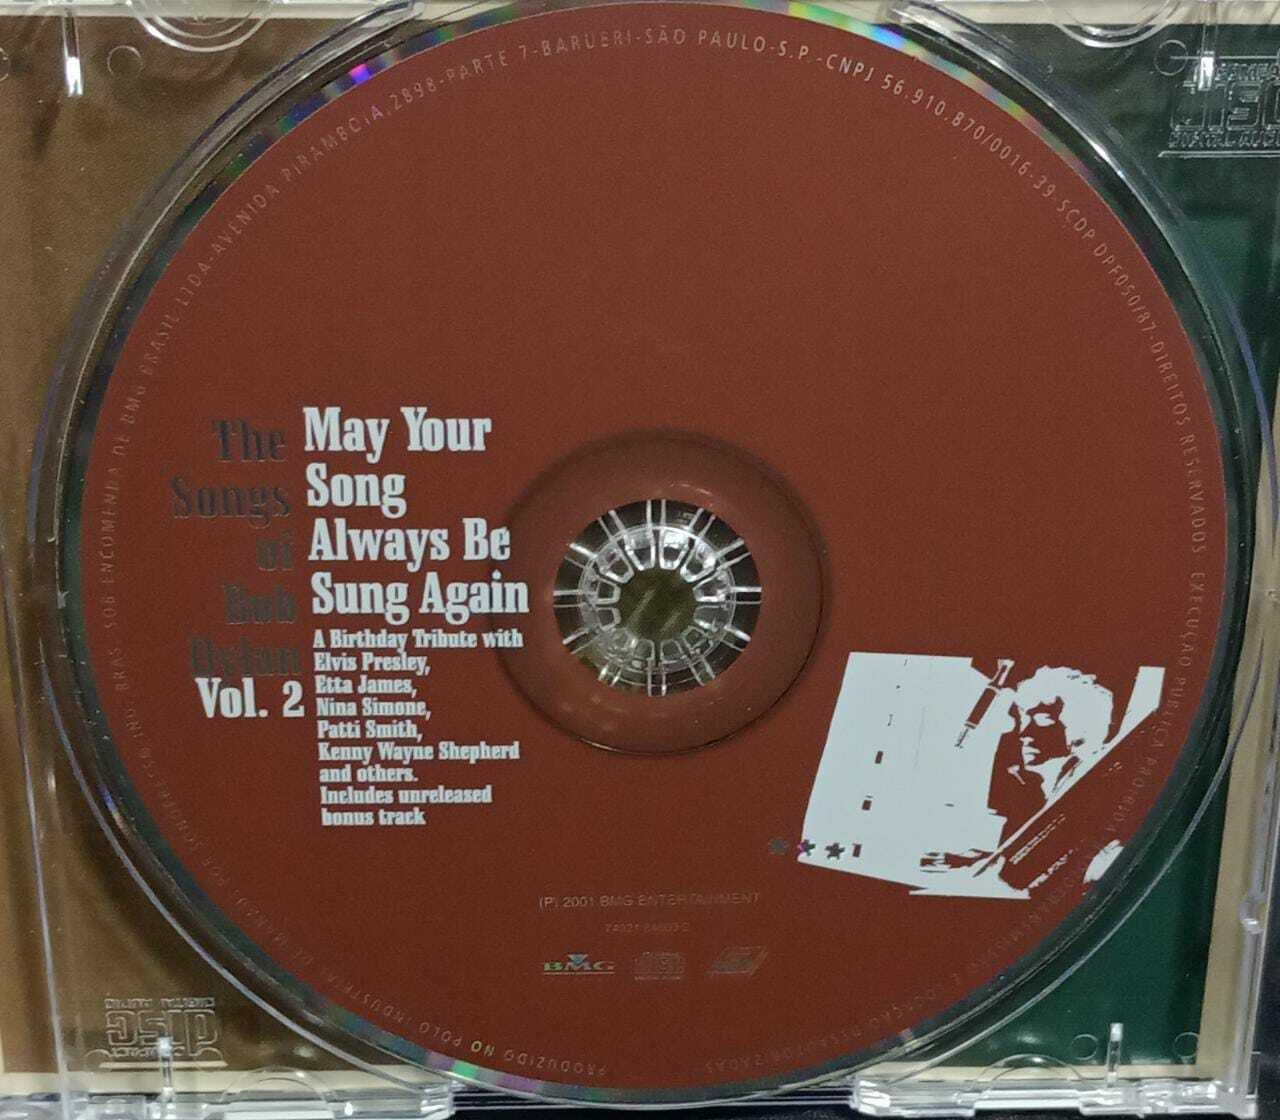 CD -  Bob Dylan - The Song of vol 2 May Your Song Always Be Sung Again